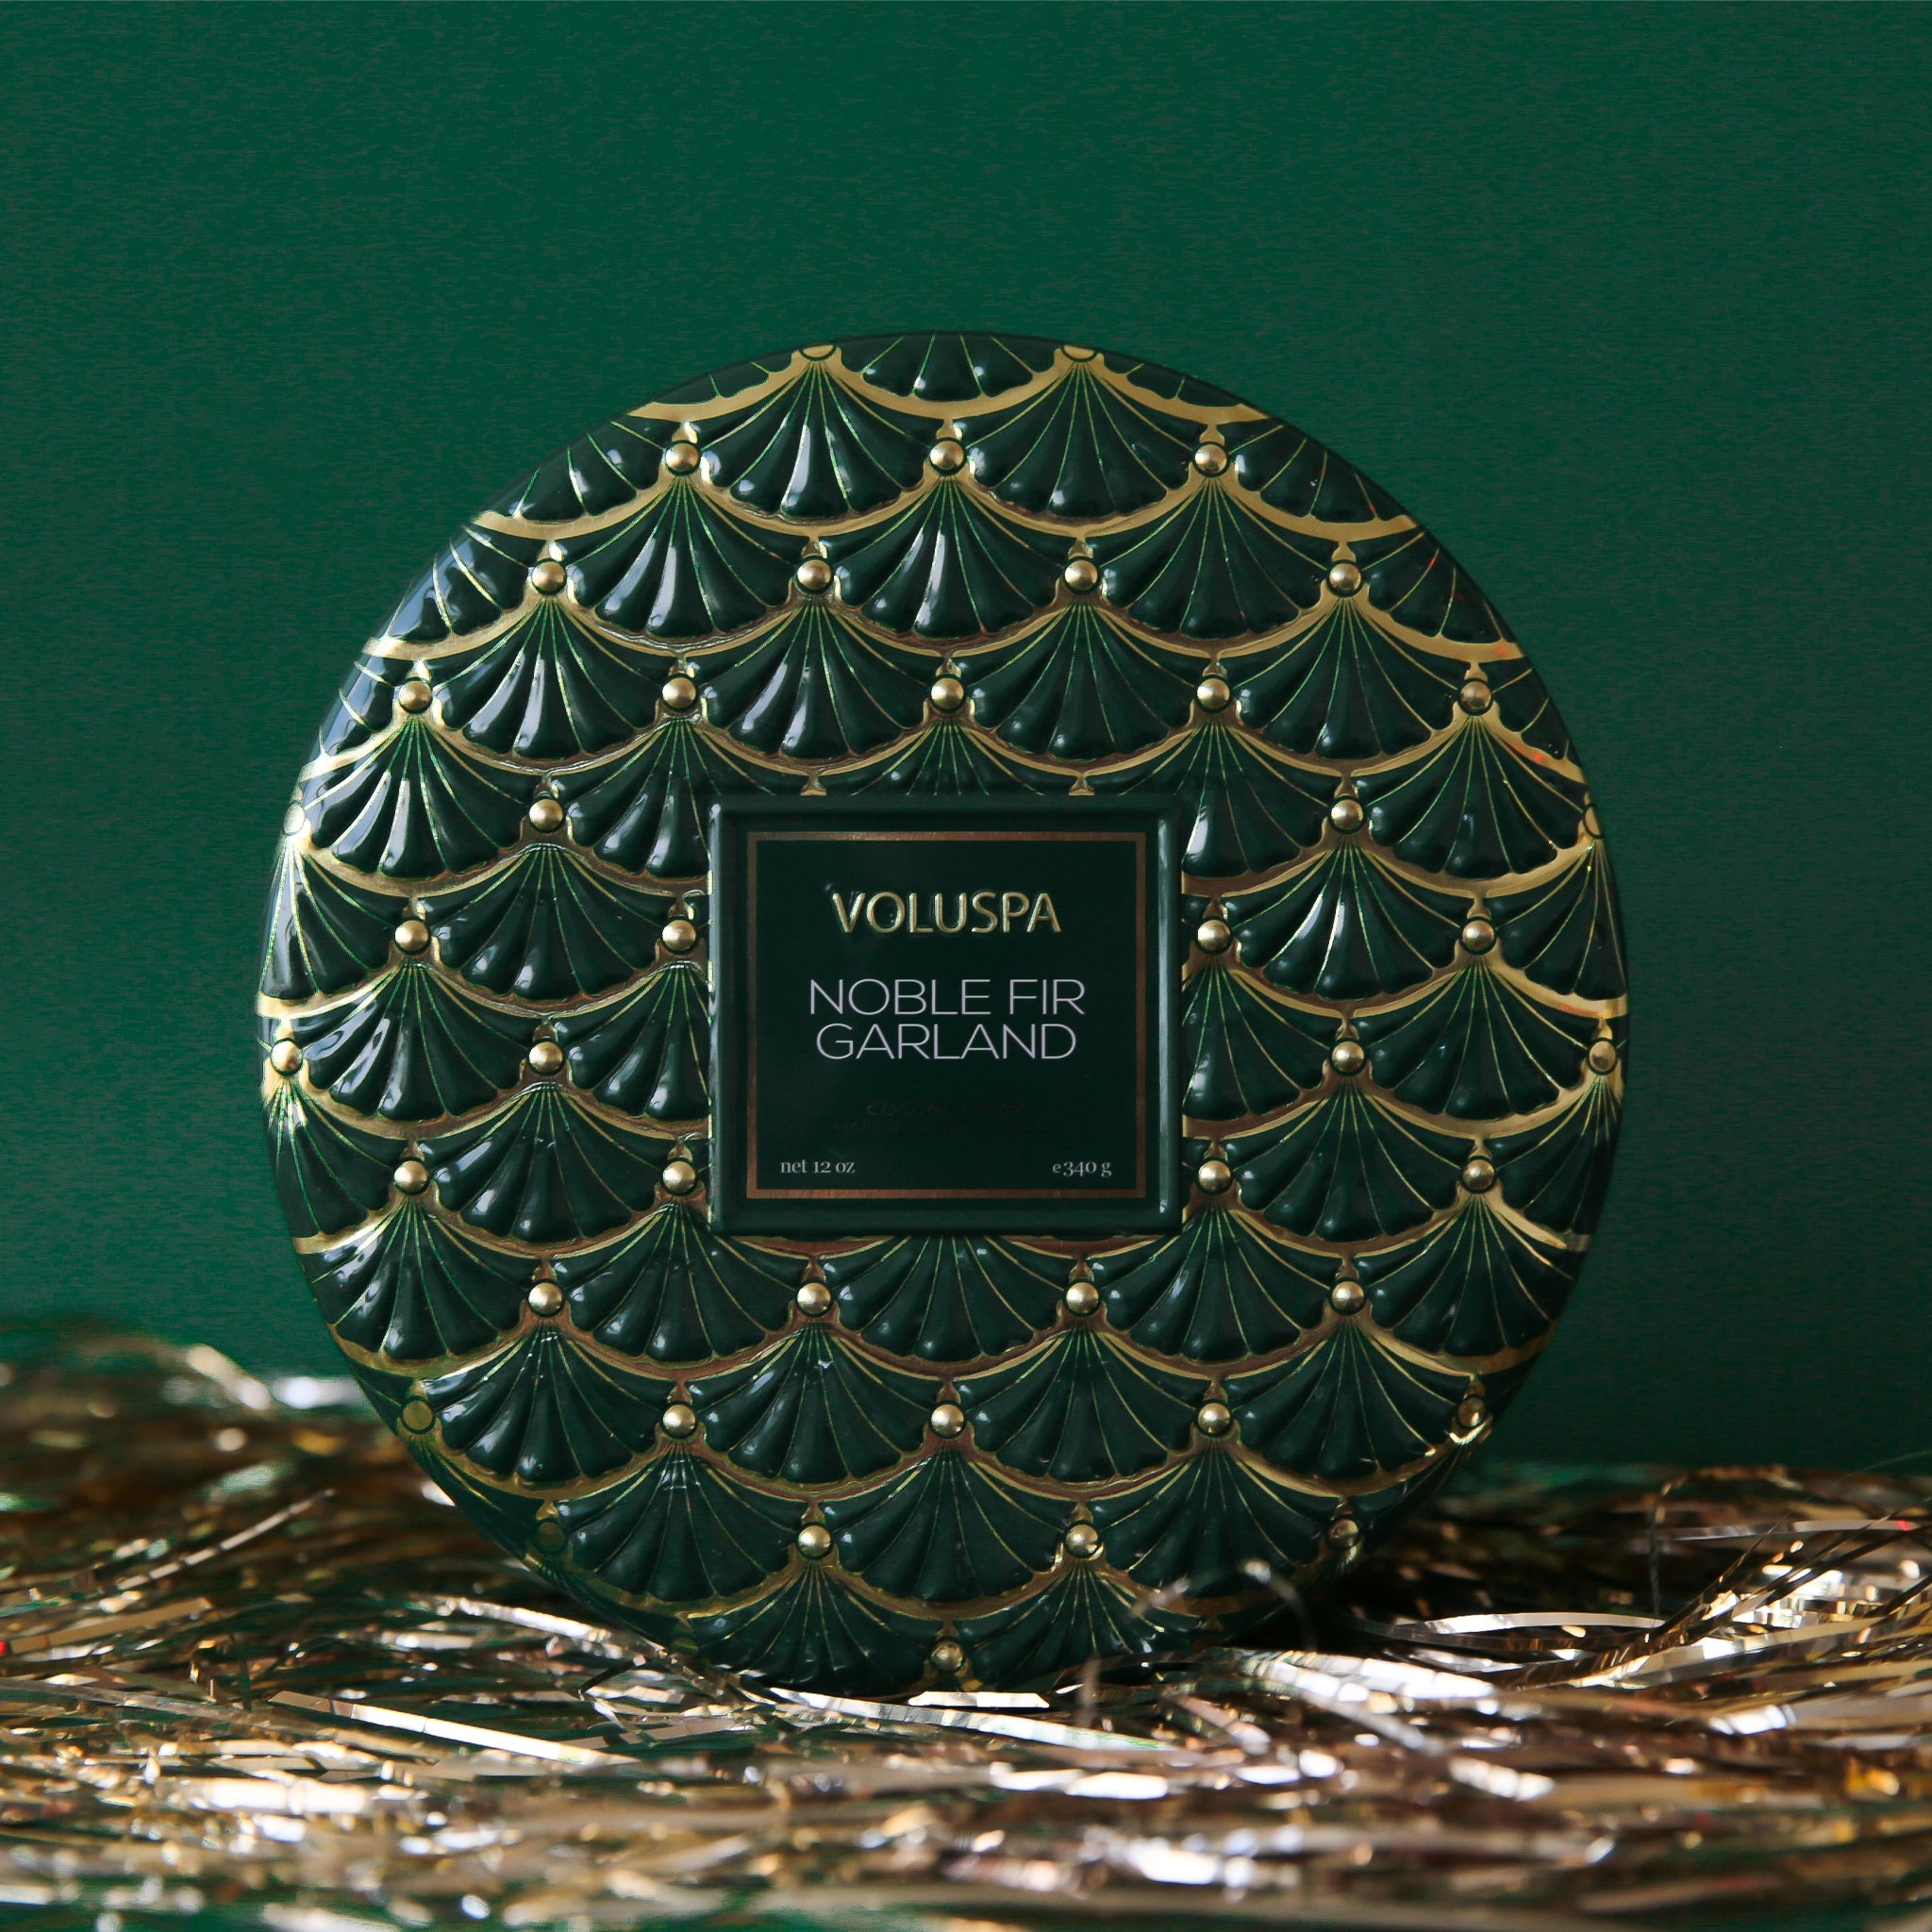 On a green background is a green 3 wick tin candle with a gold design and a matching lid.